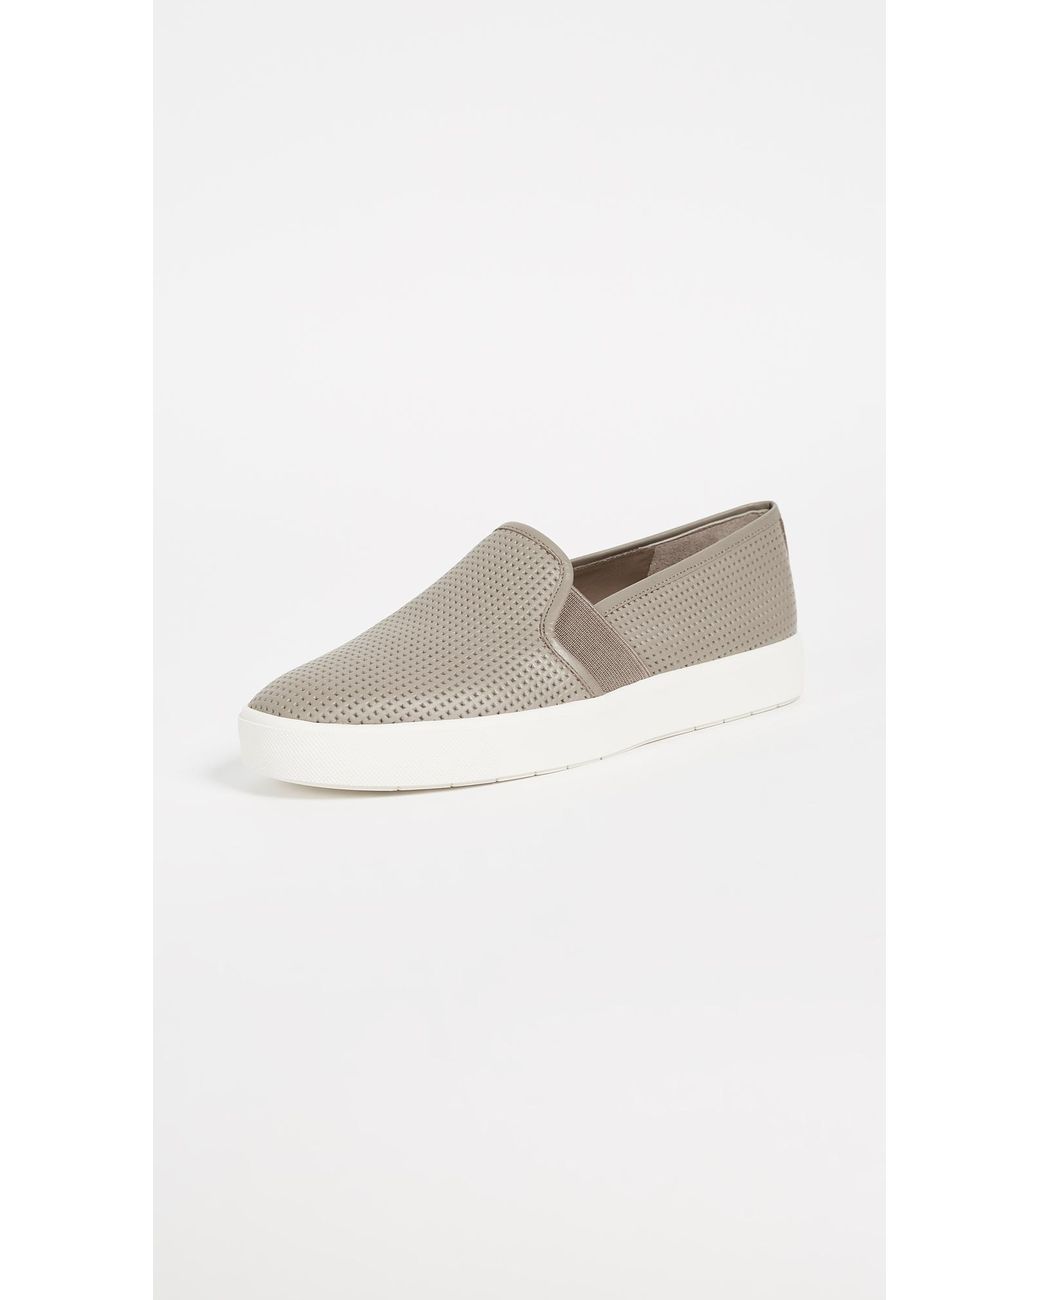 Vince Leather Blair Slip On Sneakers in Gray - Lyst